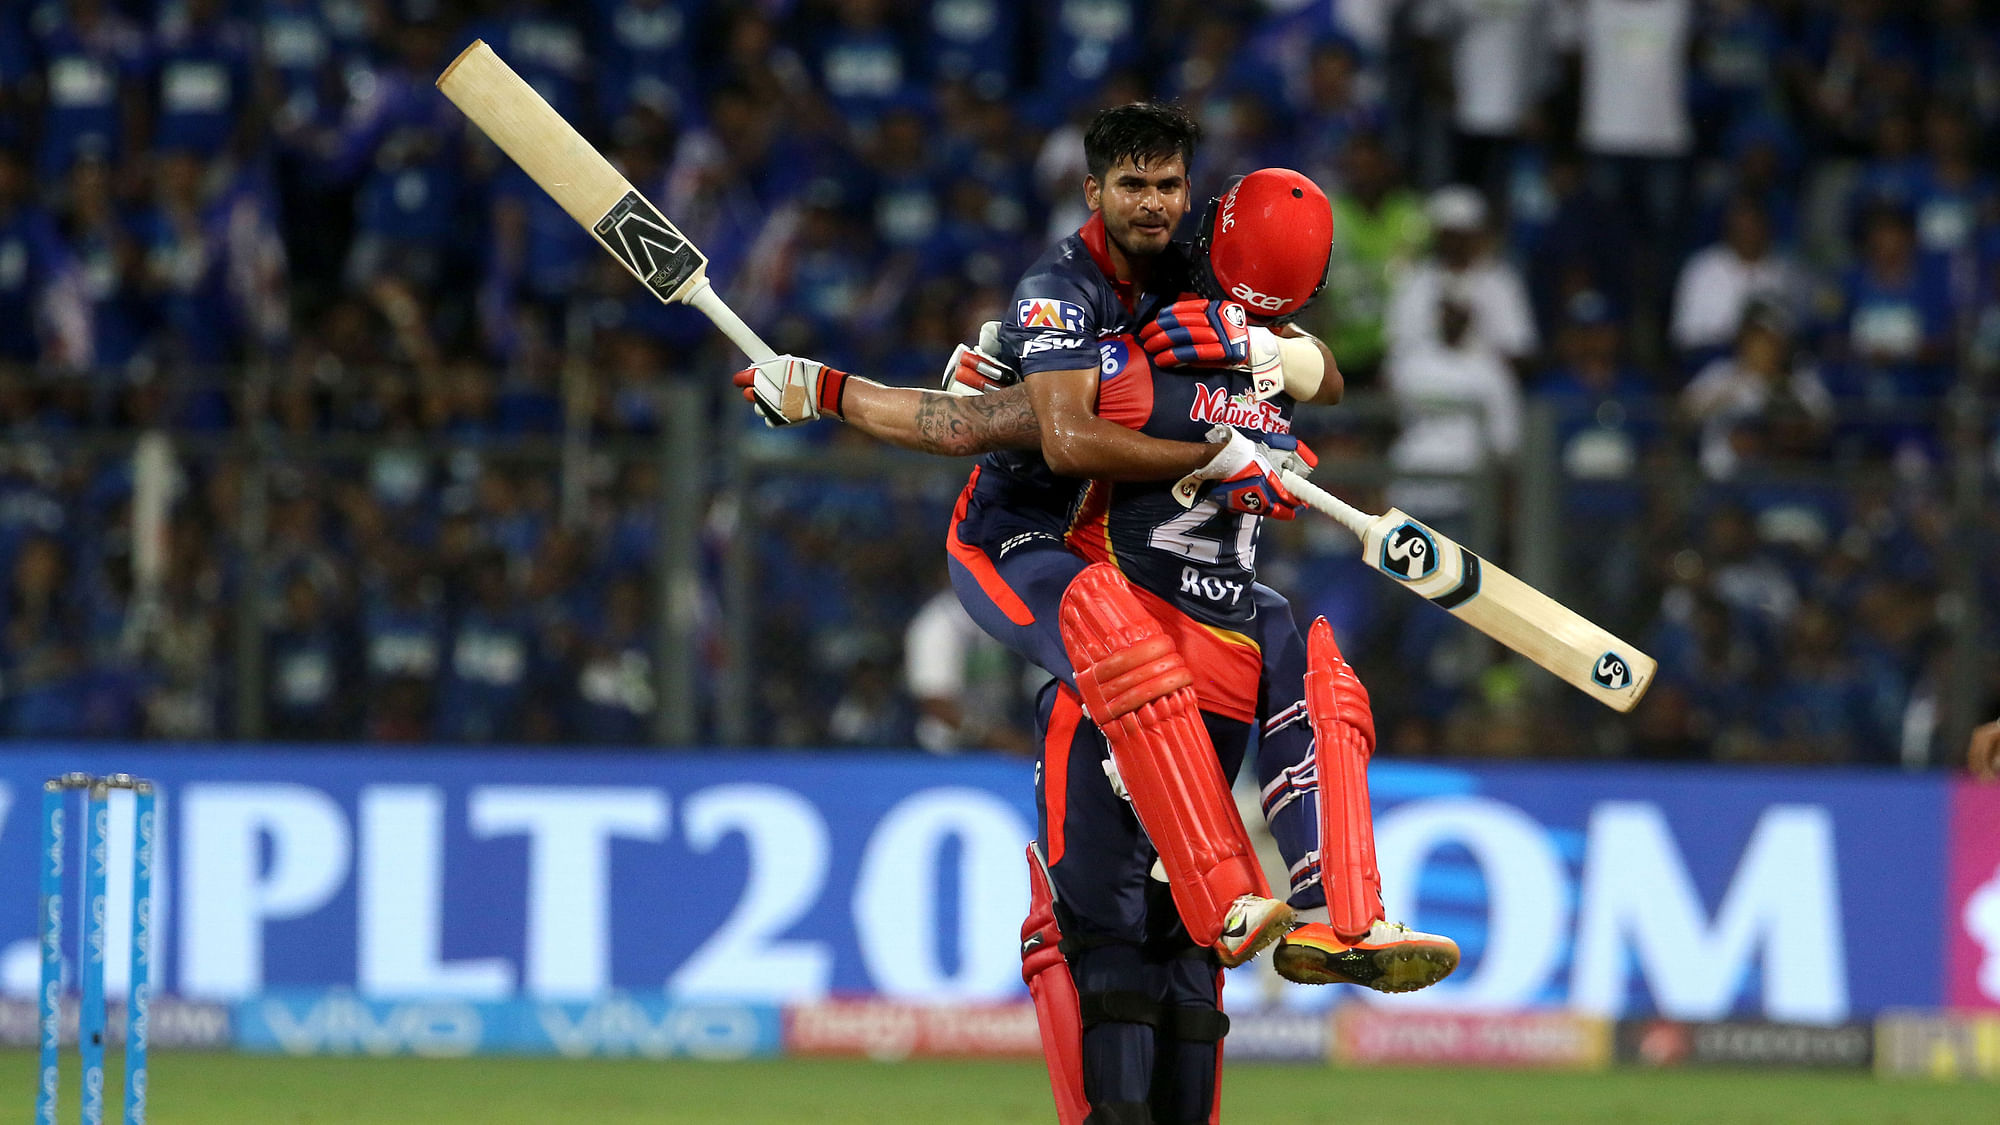 Jason Roy’s unbeaten 53-ball 91 guided Delhi Daredevils to a 7-wicket win over Mumbai Indians.